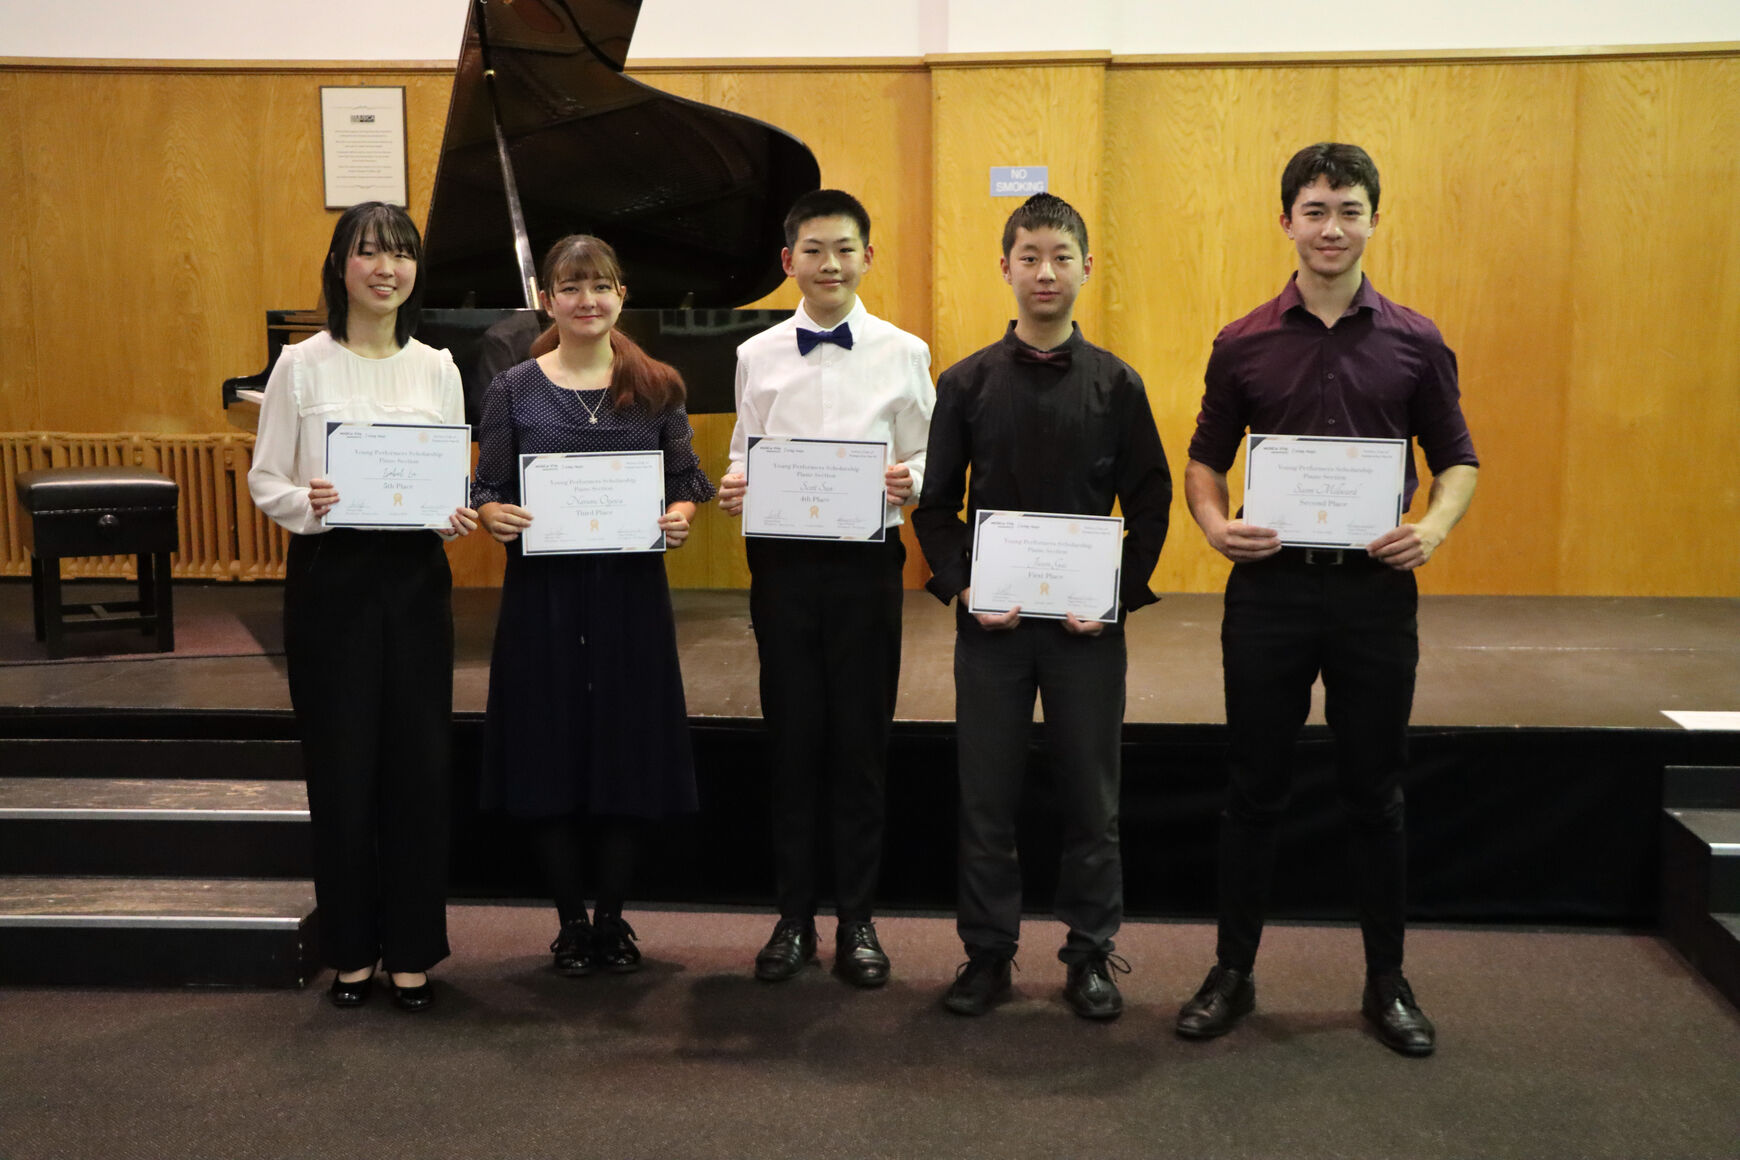 “Finalists in Piano Category” (YPS Finals, October 17, 2022)